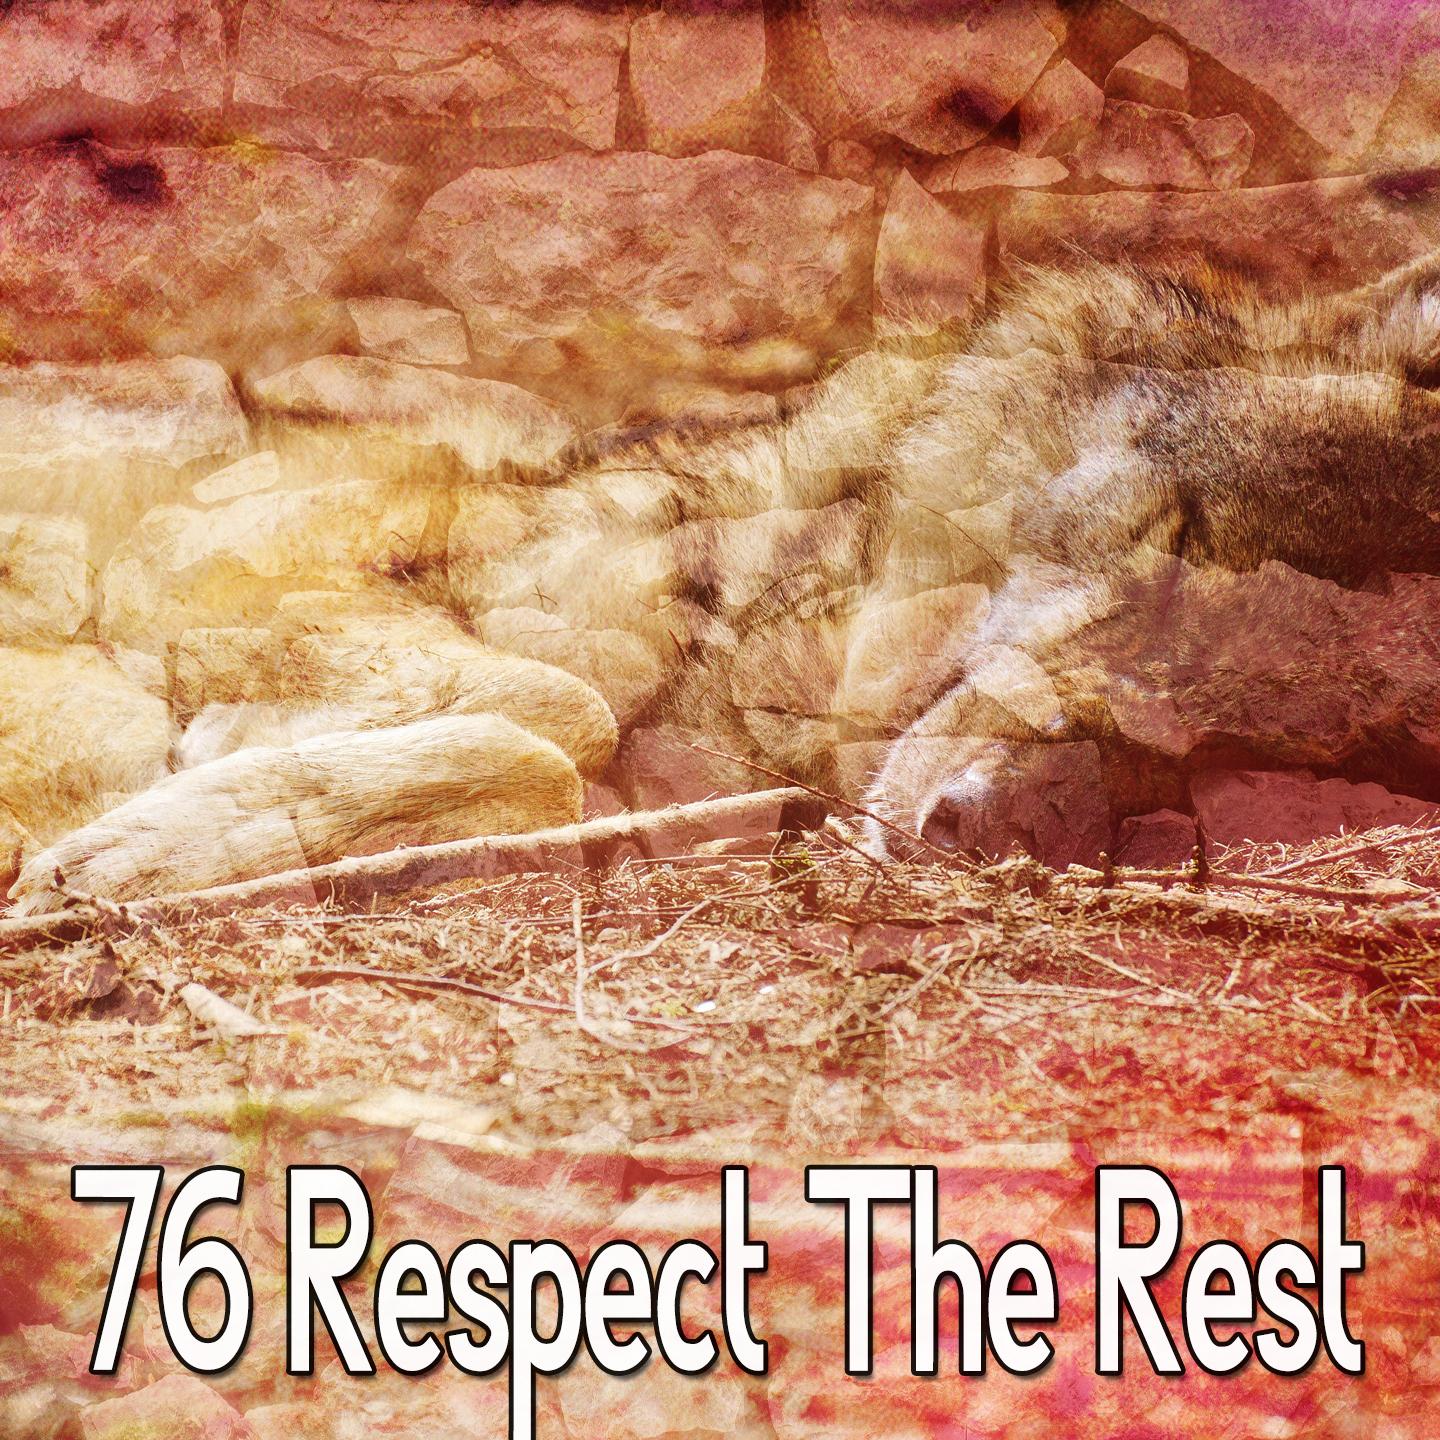 76 Respect The Rest